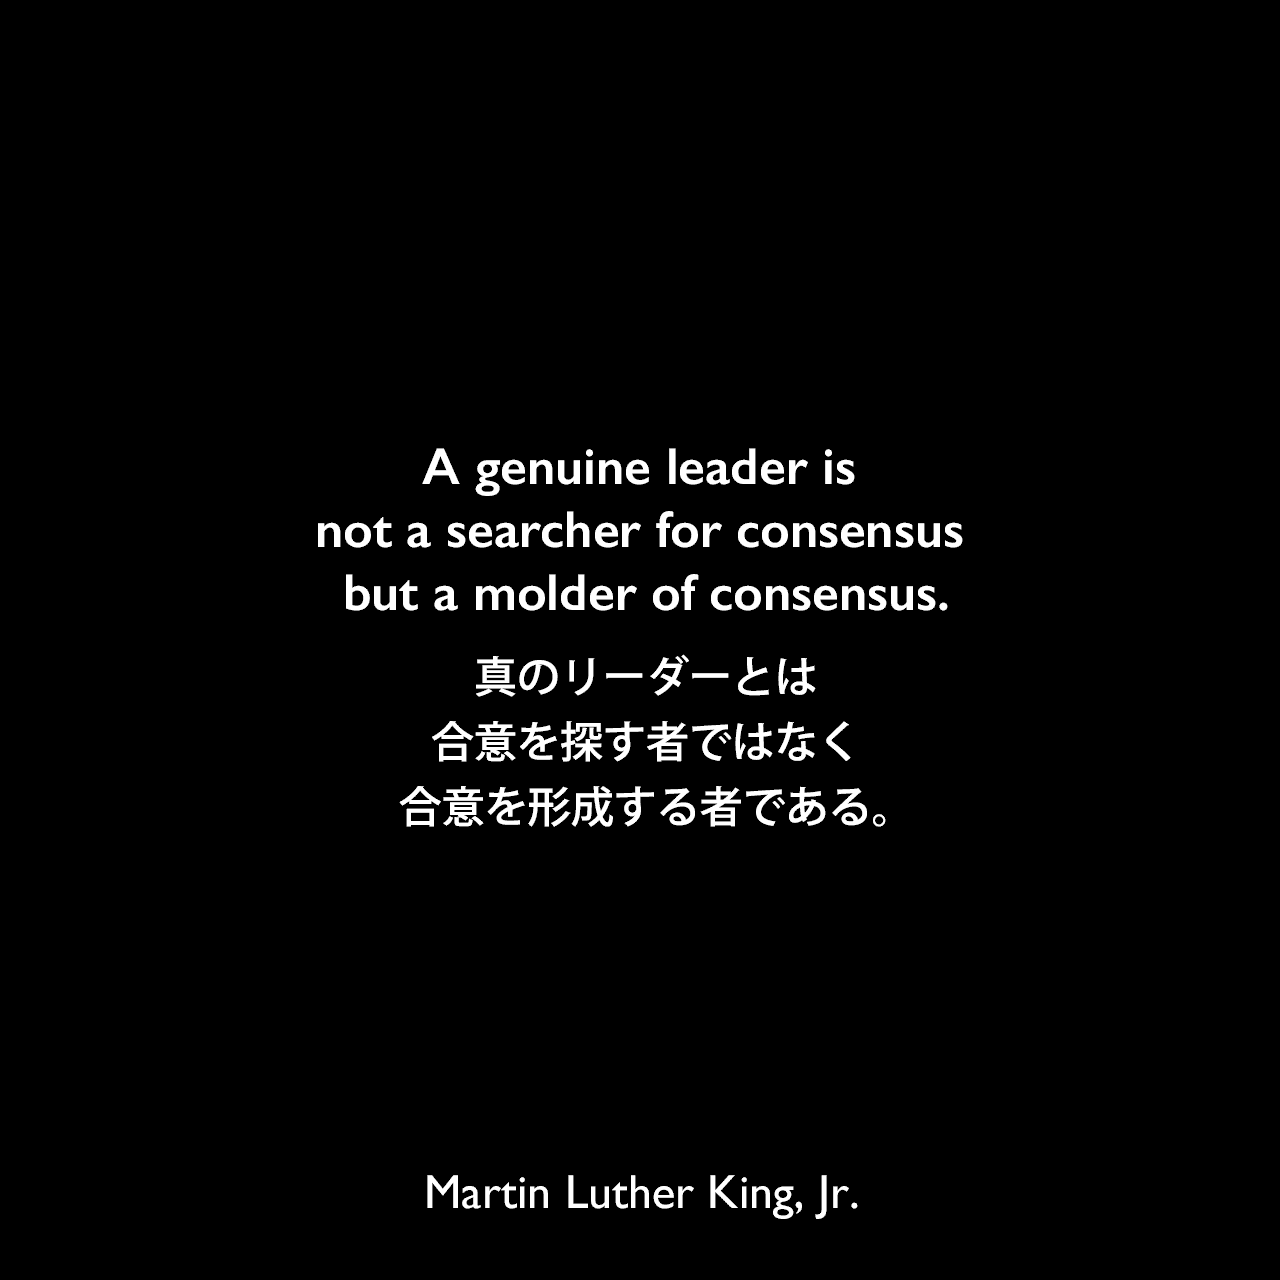 A genuine leader is not a searcher for consensus but a molder of consensus.真のリーダーとは、合意を探す者ではなく、合意を形成する者である。- 1968年のワシントンD.C.司教国立大聖堂での演説「Remaining Awake Through a Great Revolution」よりMartin Luther King, Jr.